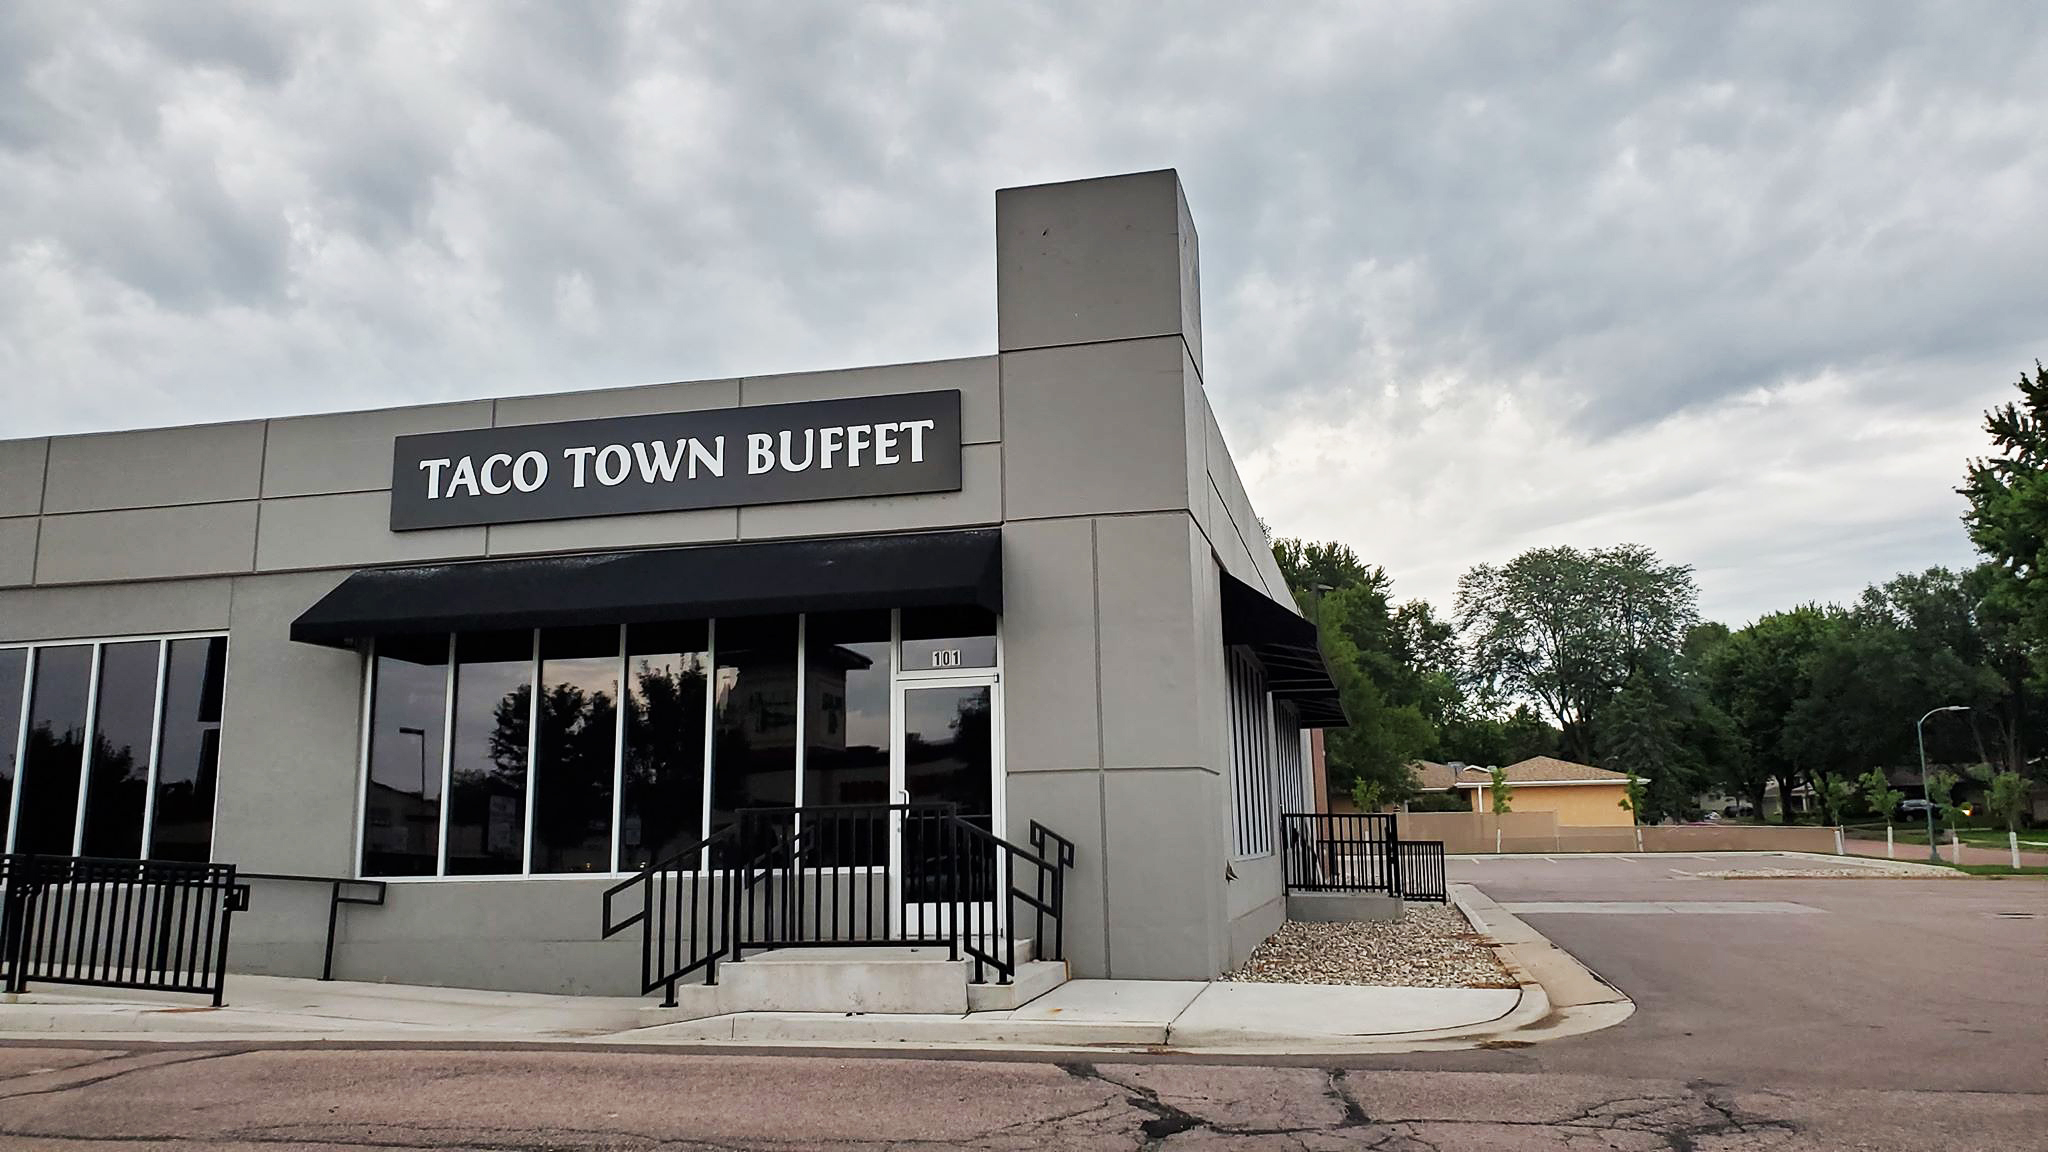 New Restaurant Coming to Sioux Falls! ⋆ Whats going on Sioux Falls